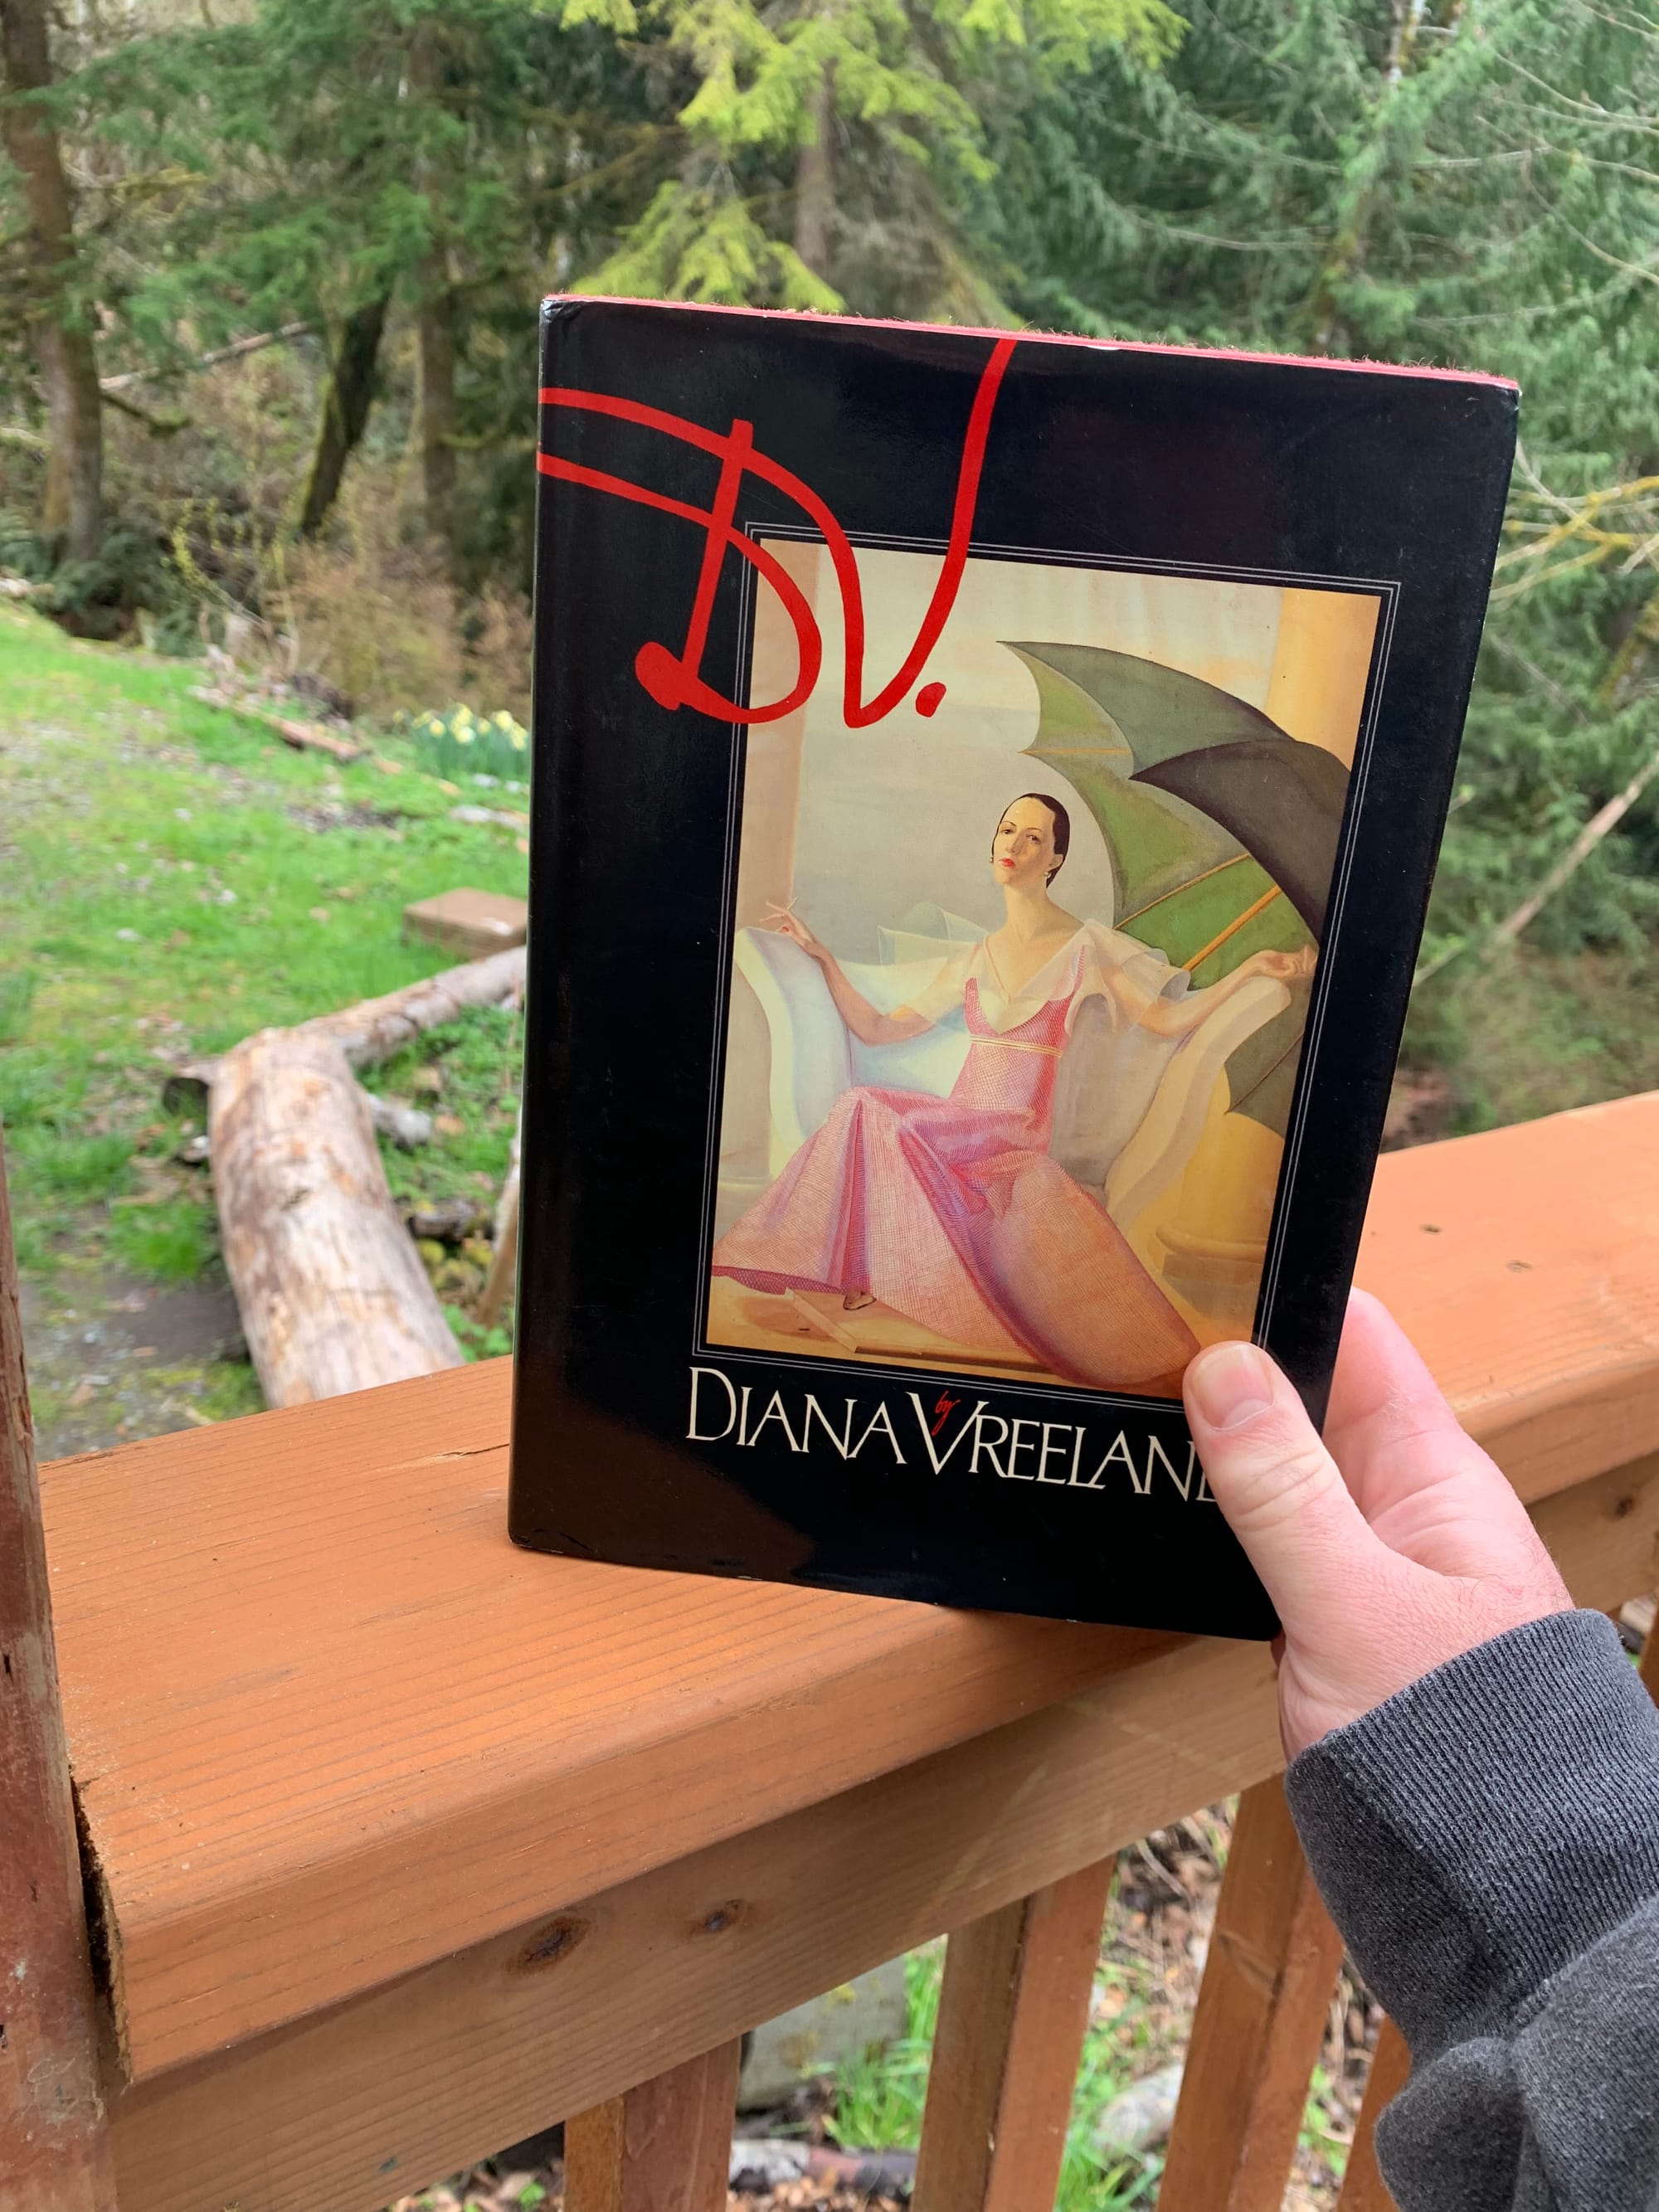 hardback copy of Diana Vreeland's book D.V. held up against a background of a porch railing & trees